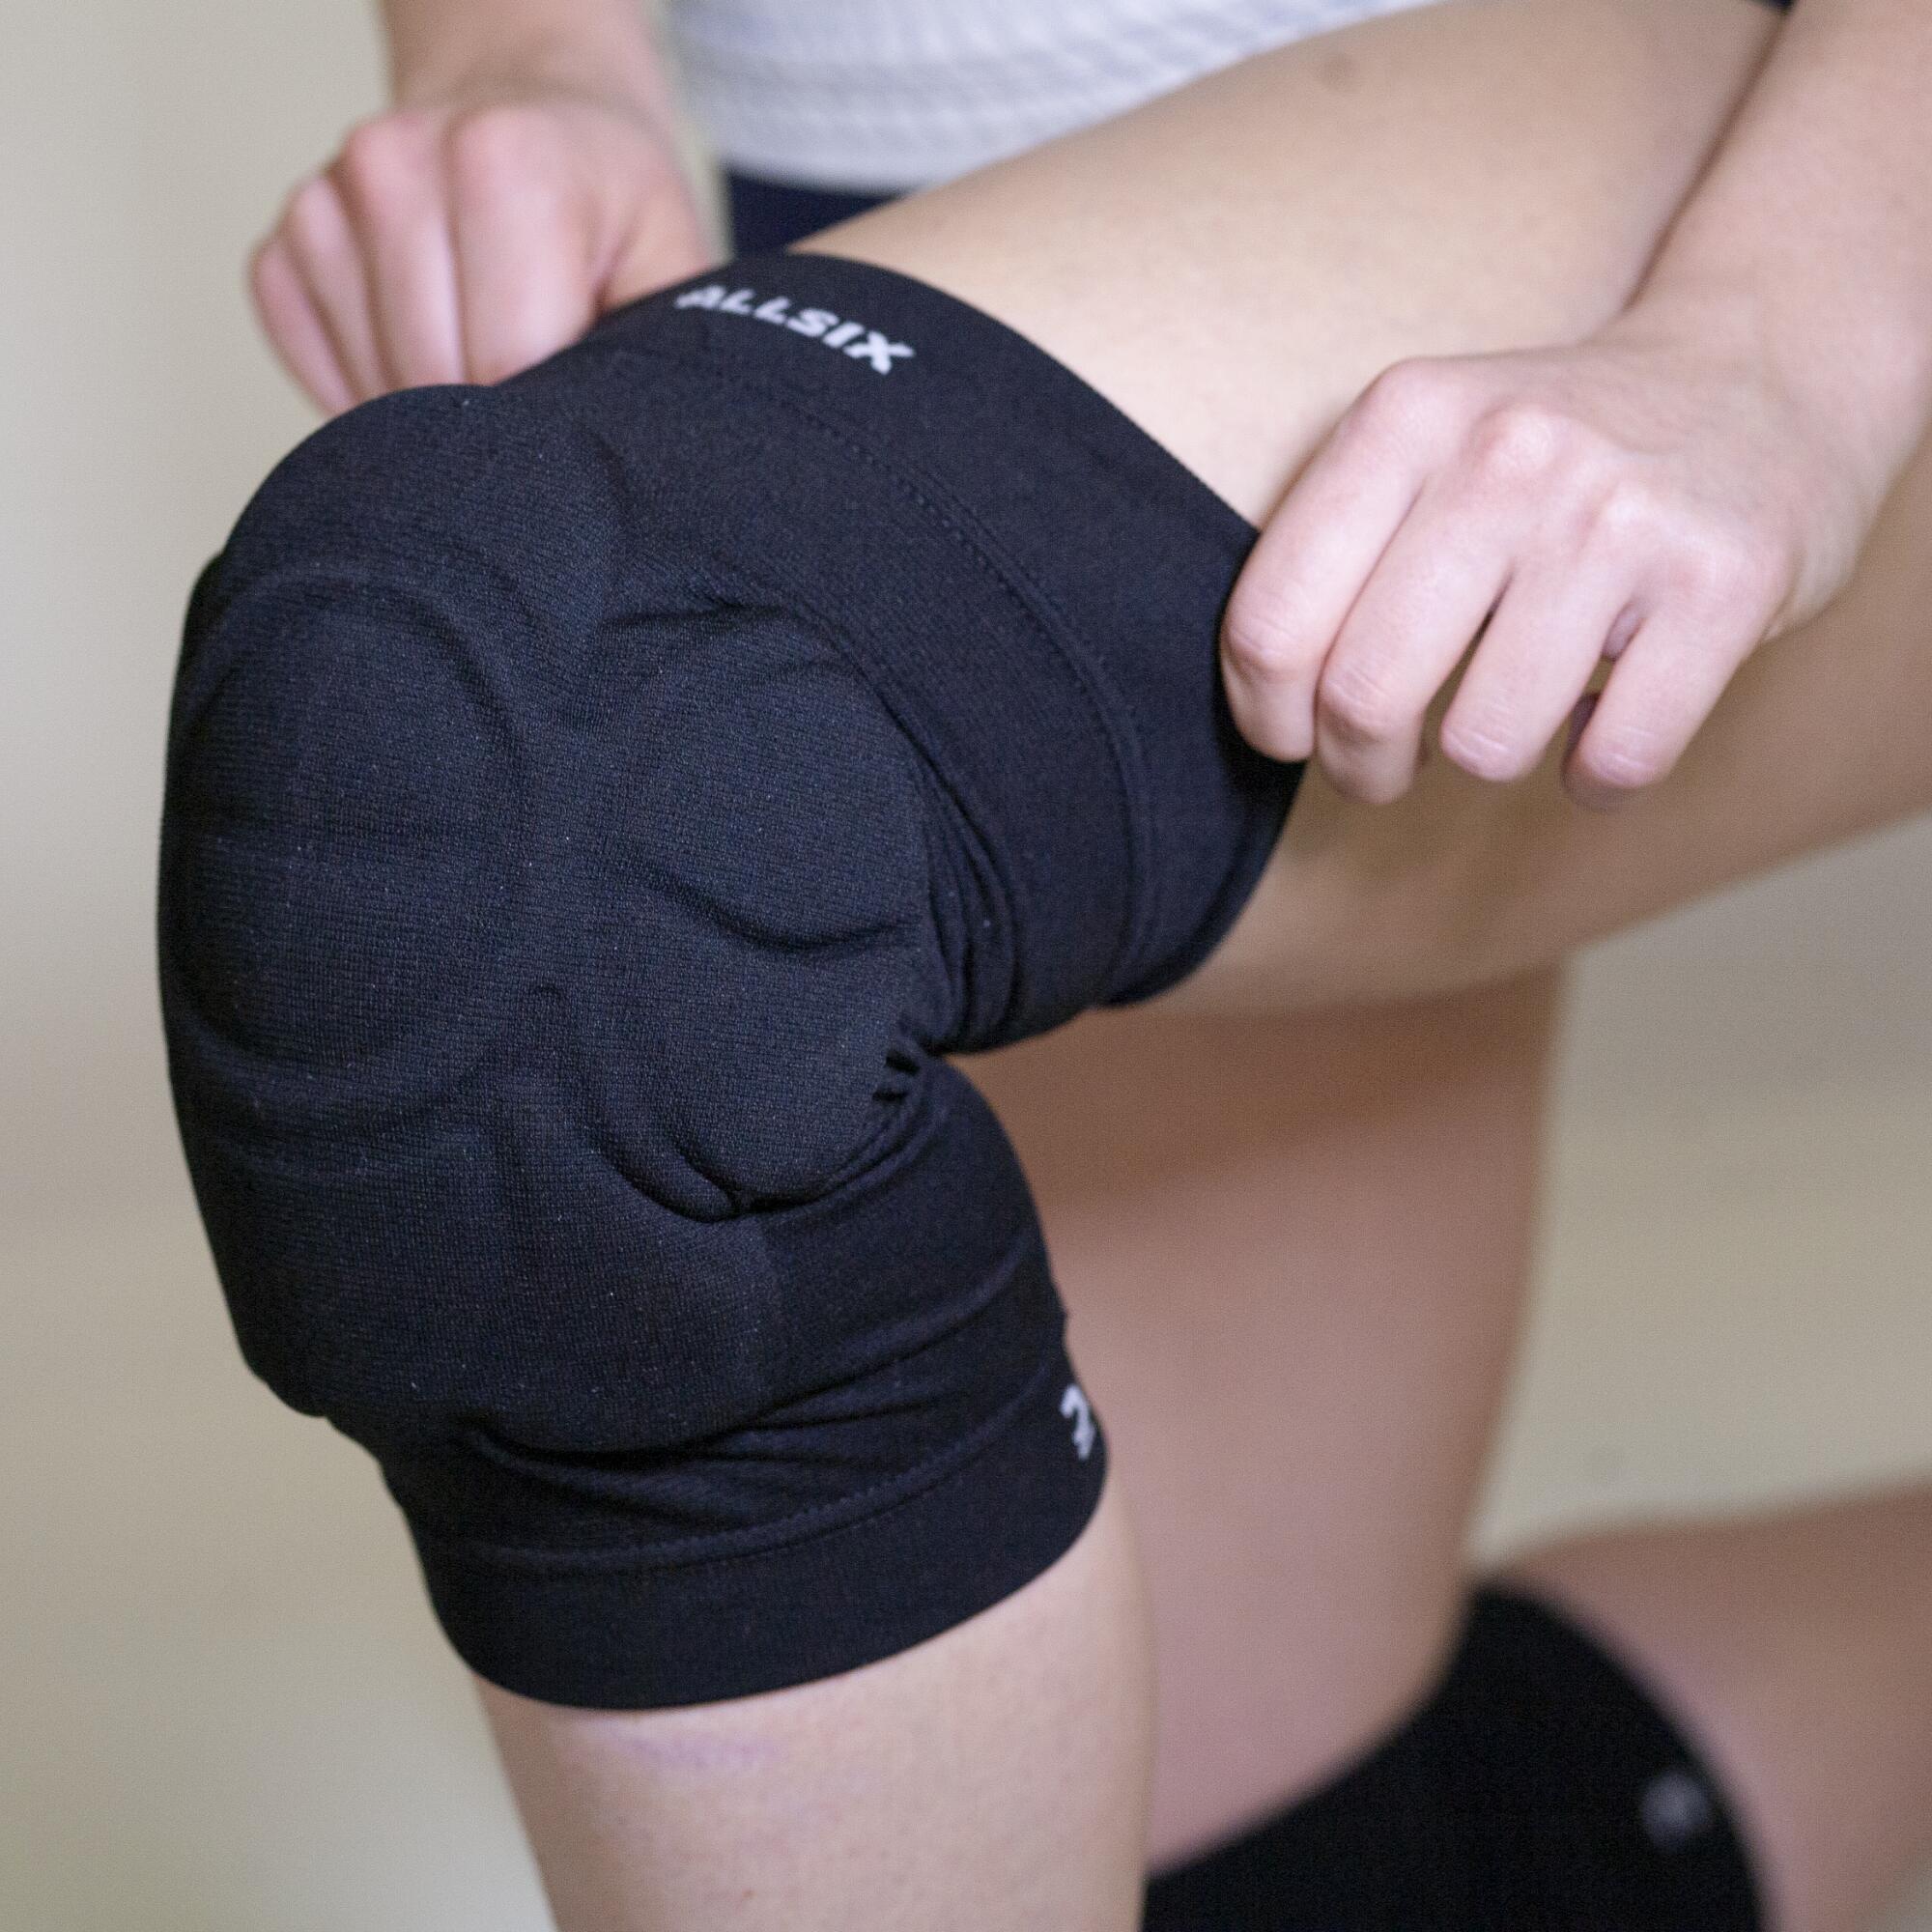 Volleyball Knee Pads for Intensive Play. 2/6